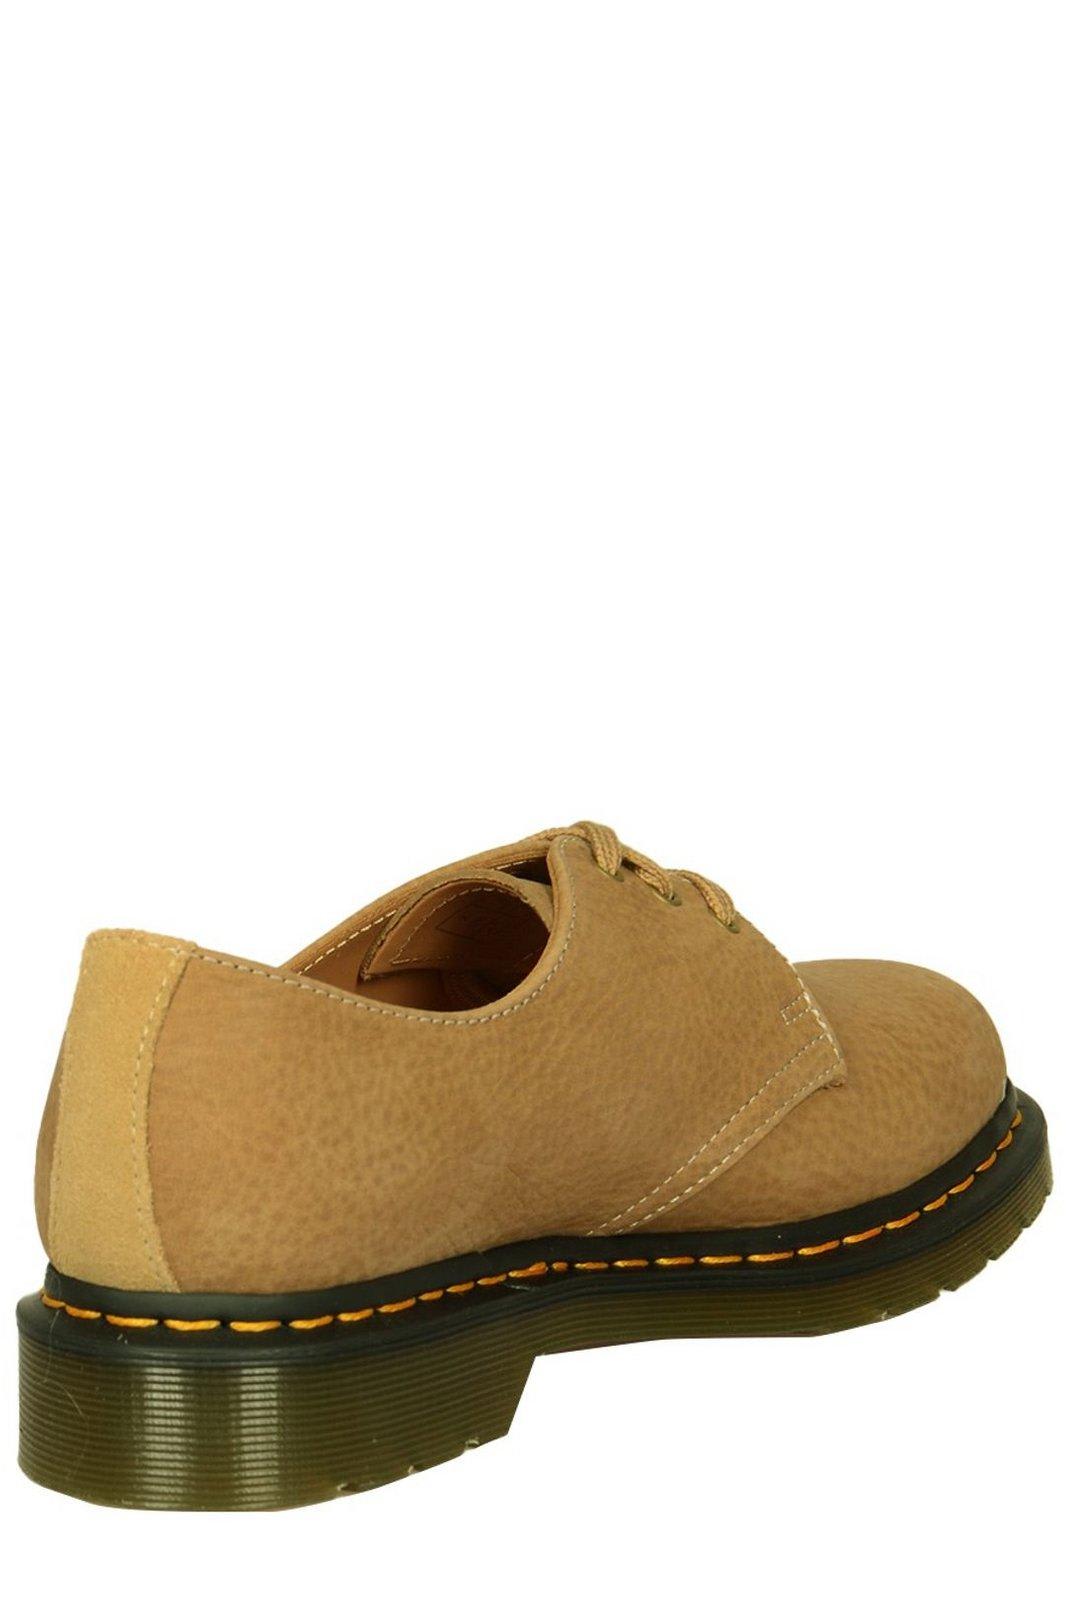 Shop Dr. Martens' 1461 Lace-up Oxford Shoes In Savannah Tan Tumbled Nubuck